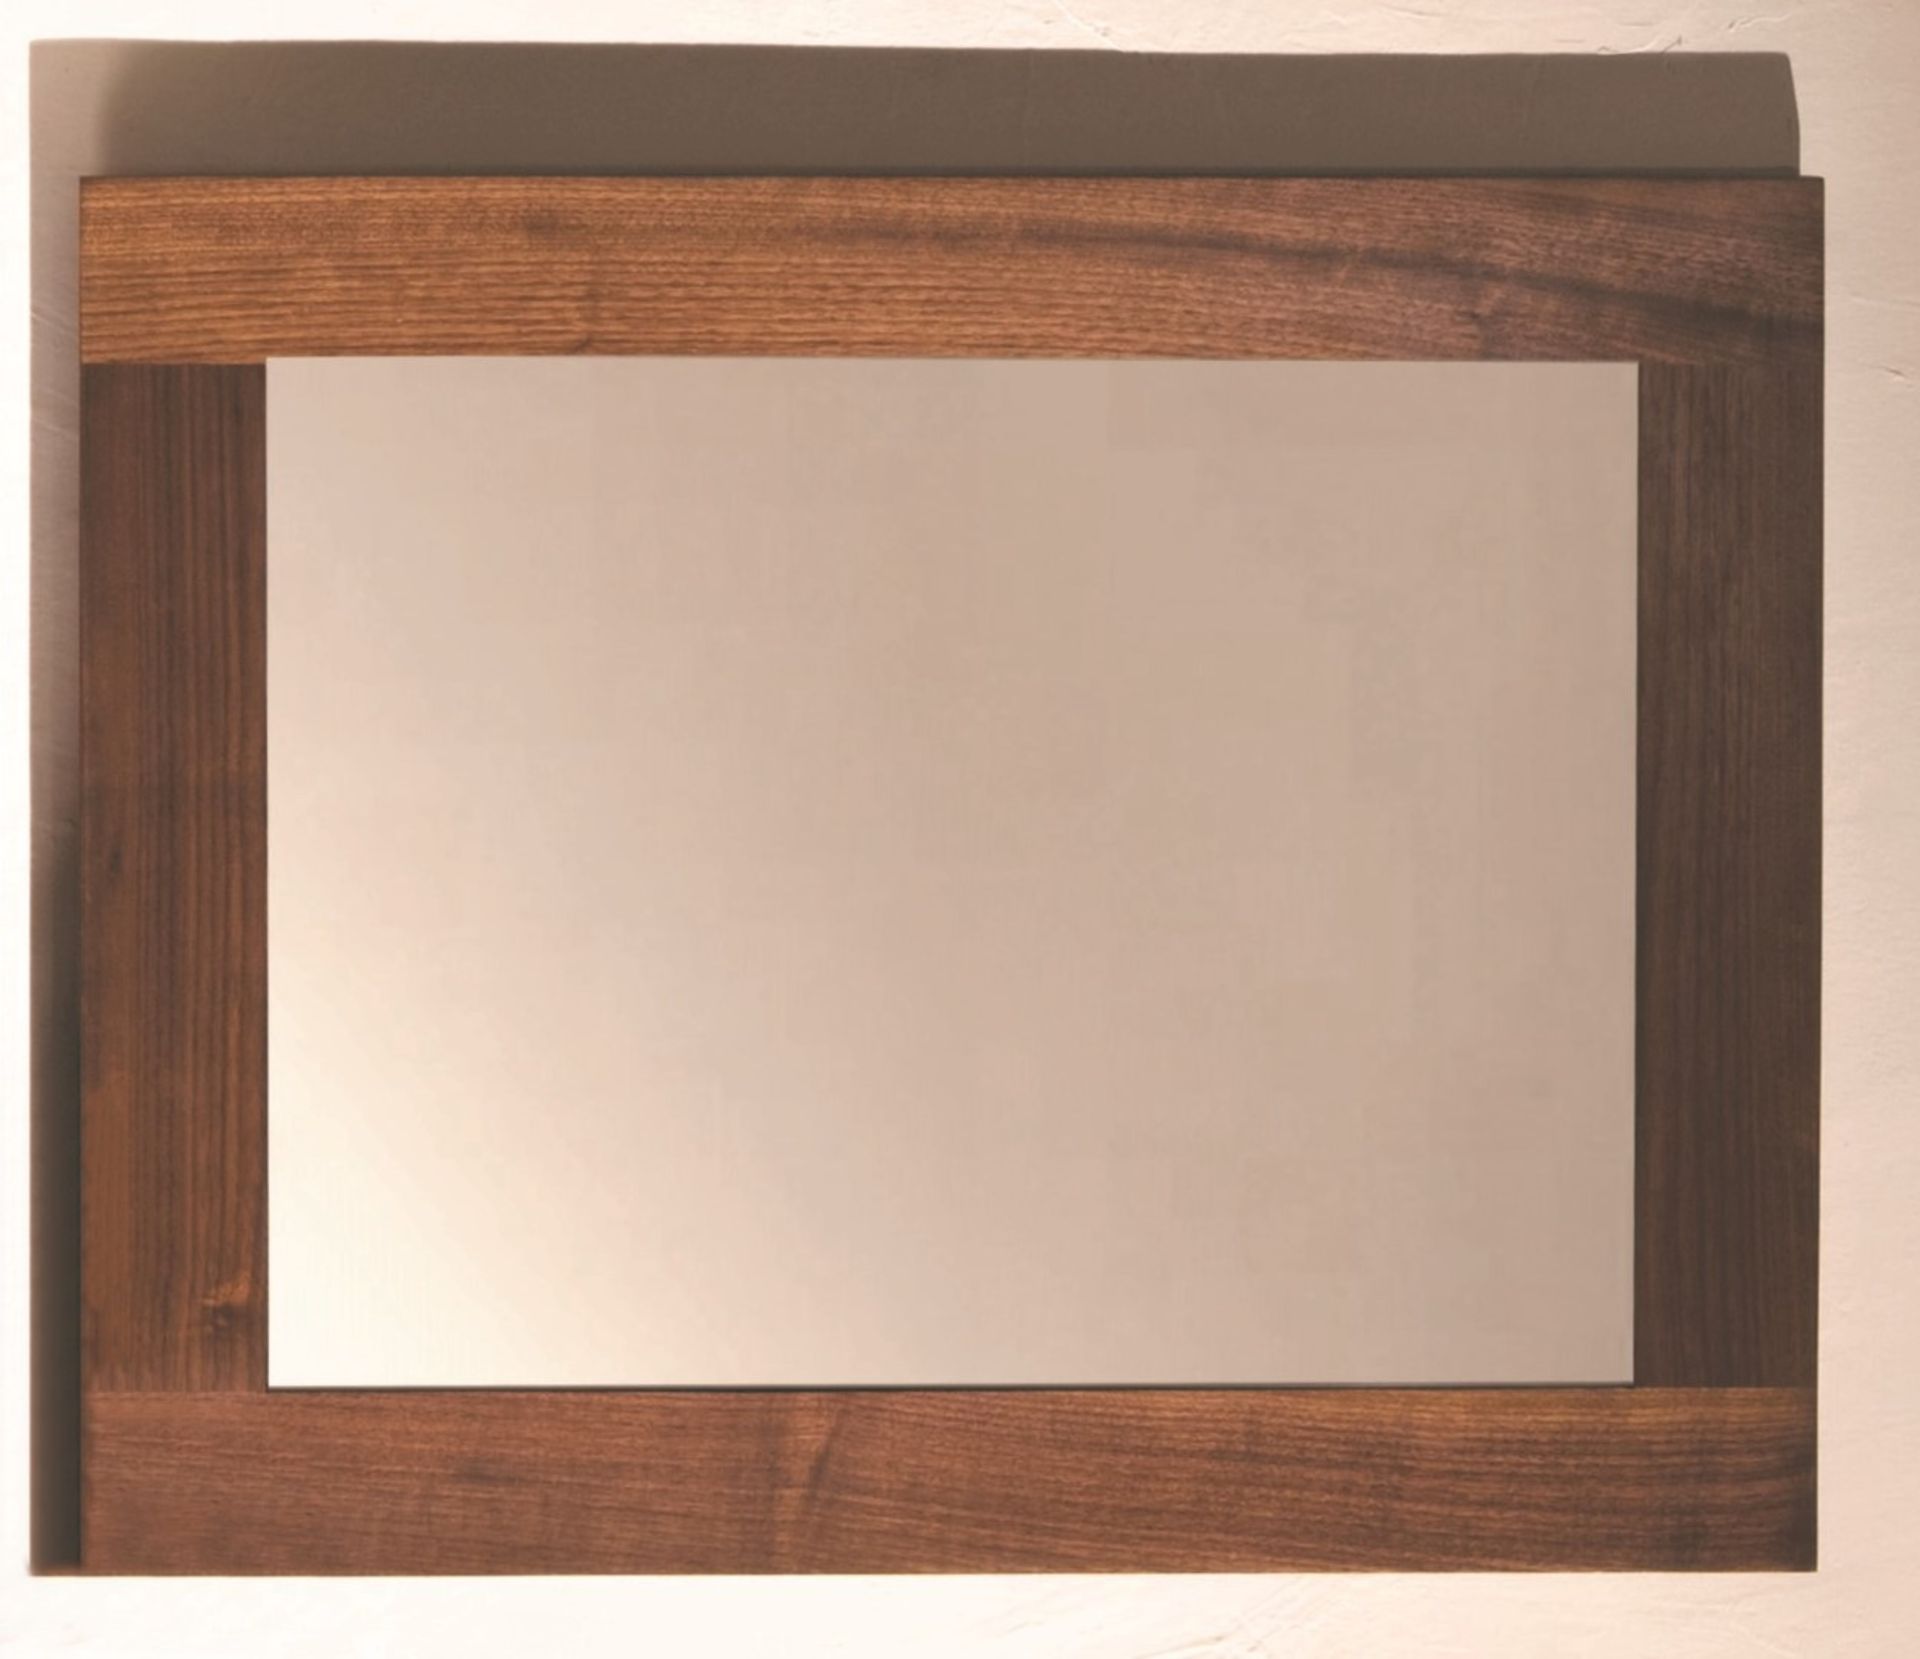 1 x Stonearth Medium Wall Mirror Frame - American Solid Walnut Frame For Mirrors or Pictures